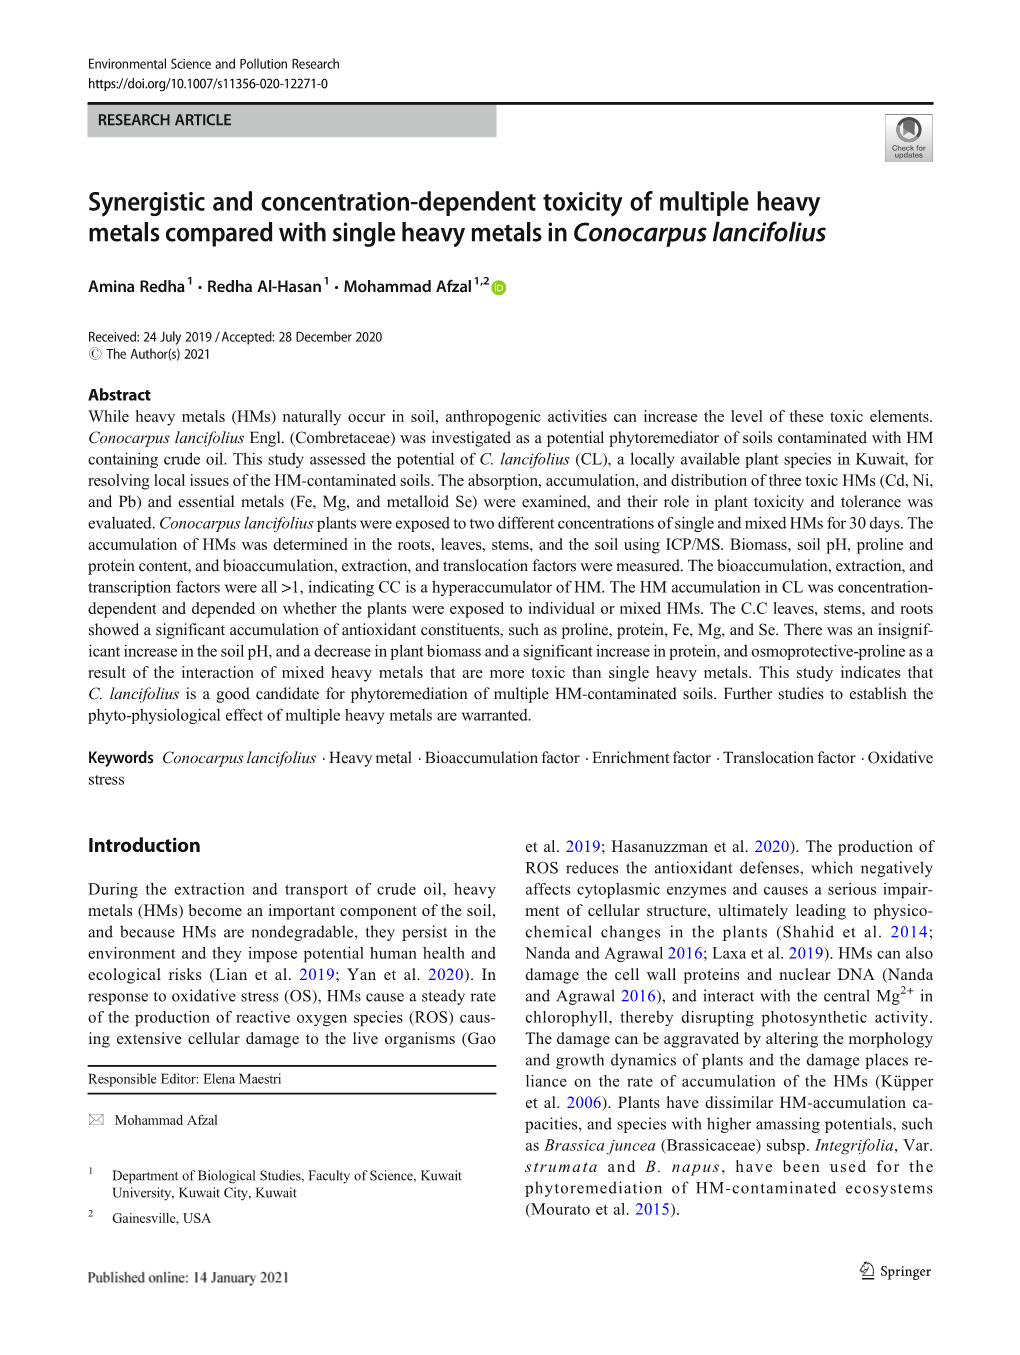 Synergistic and Concentration-Dependent Toxicity of Multiple Heavy Metals Compared with Single Heavy Metals in Conocarpus Lancifolius